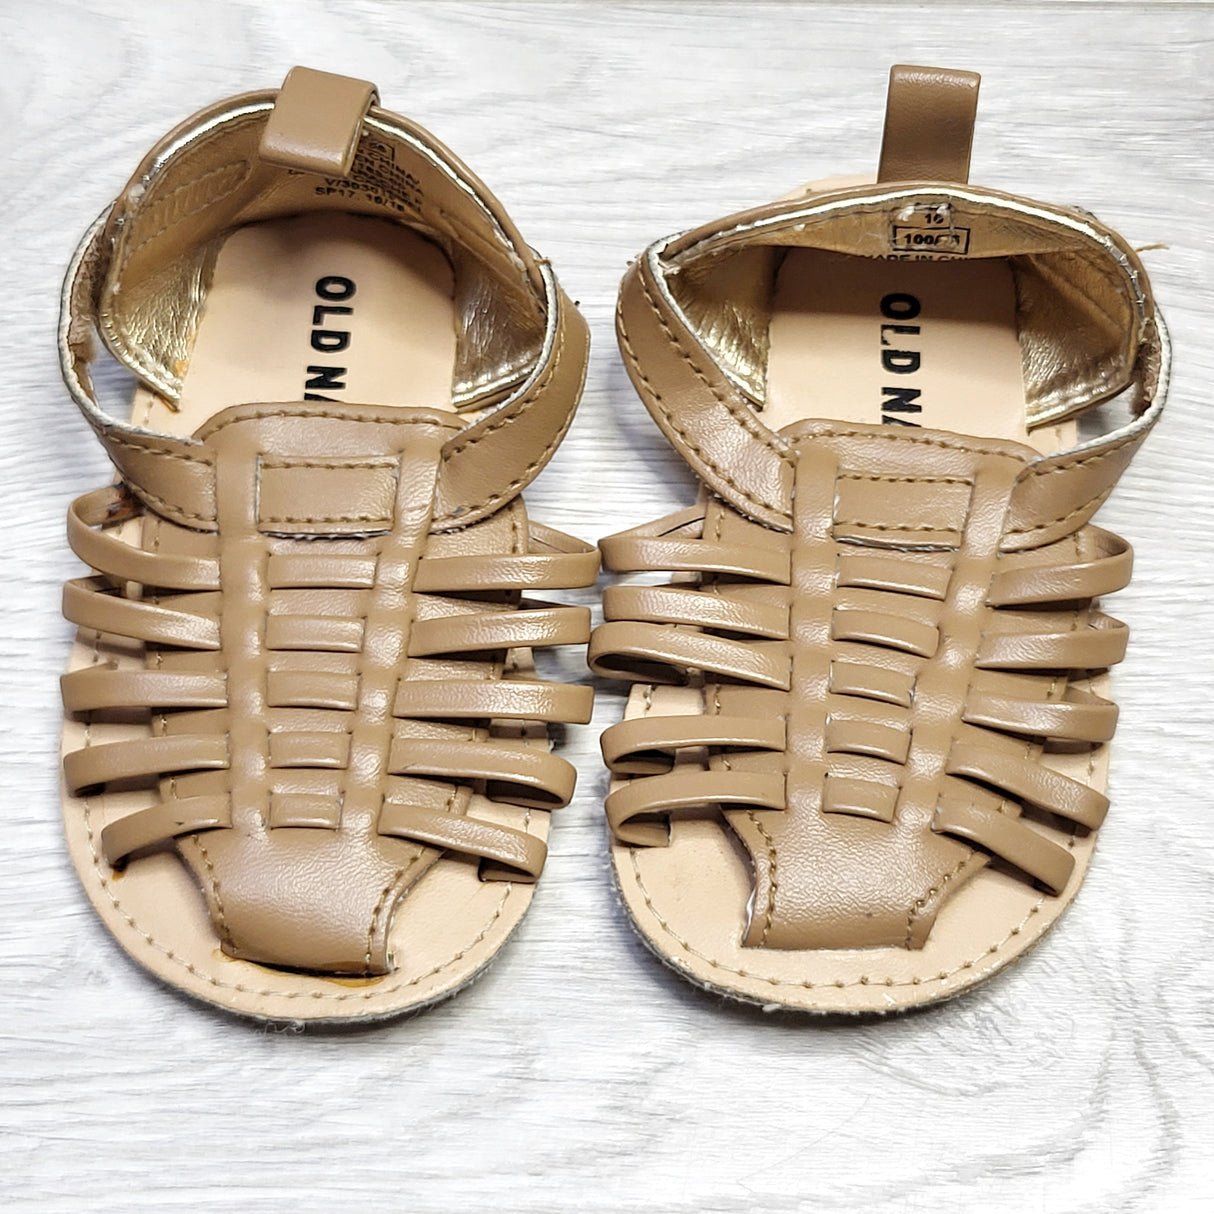 MSNDS11 - Old Navy brown soft soled woven sandals. Size 3-6 months